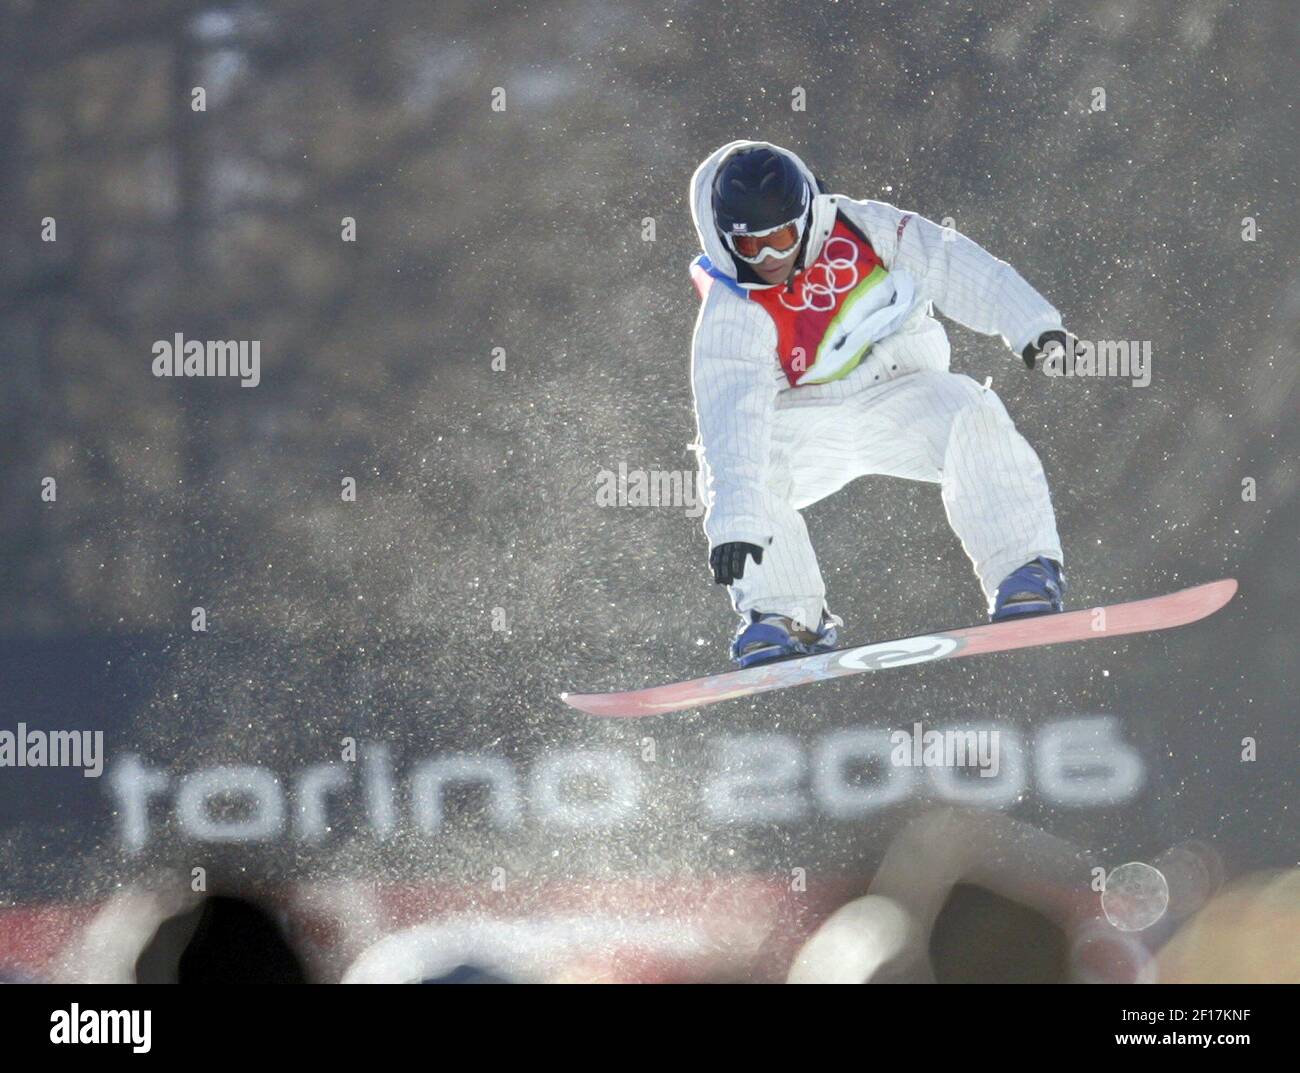 USA's Andy Finch catches air on his first qualification run during the Men's Halfpipe snowboard competition in Bardonecchia on Sunday, February 12, 2006 during the 2006 Winter Games. (Photo by Joe Rimkus Jr./Miami Herald/KRT) Stock Photo